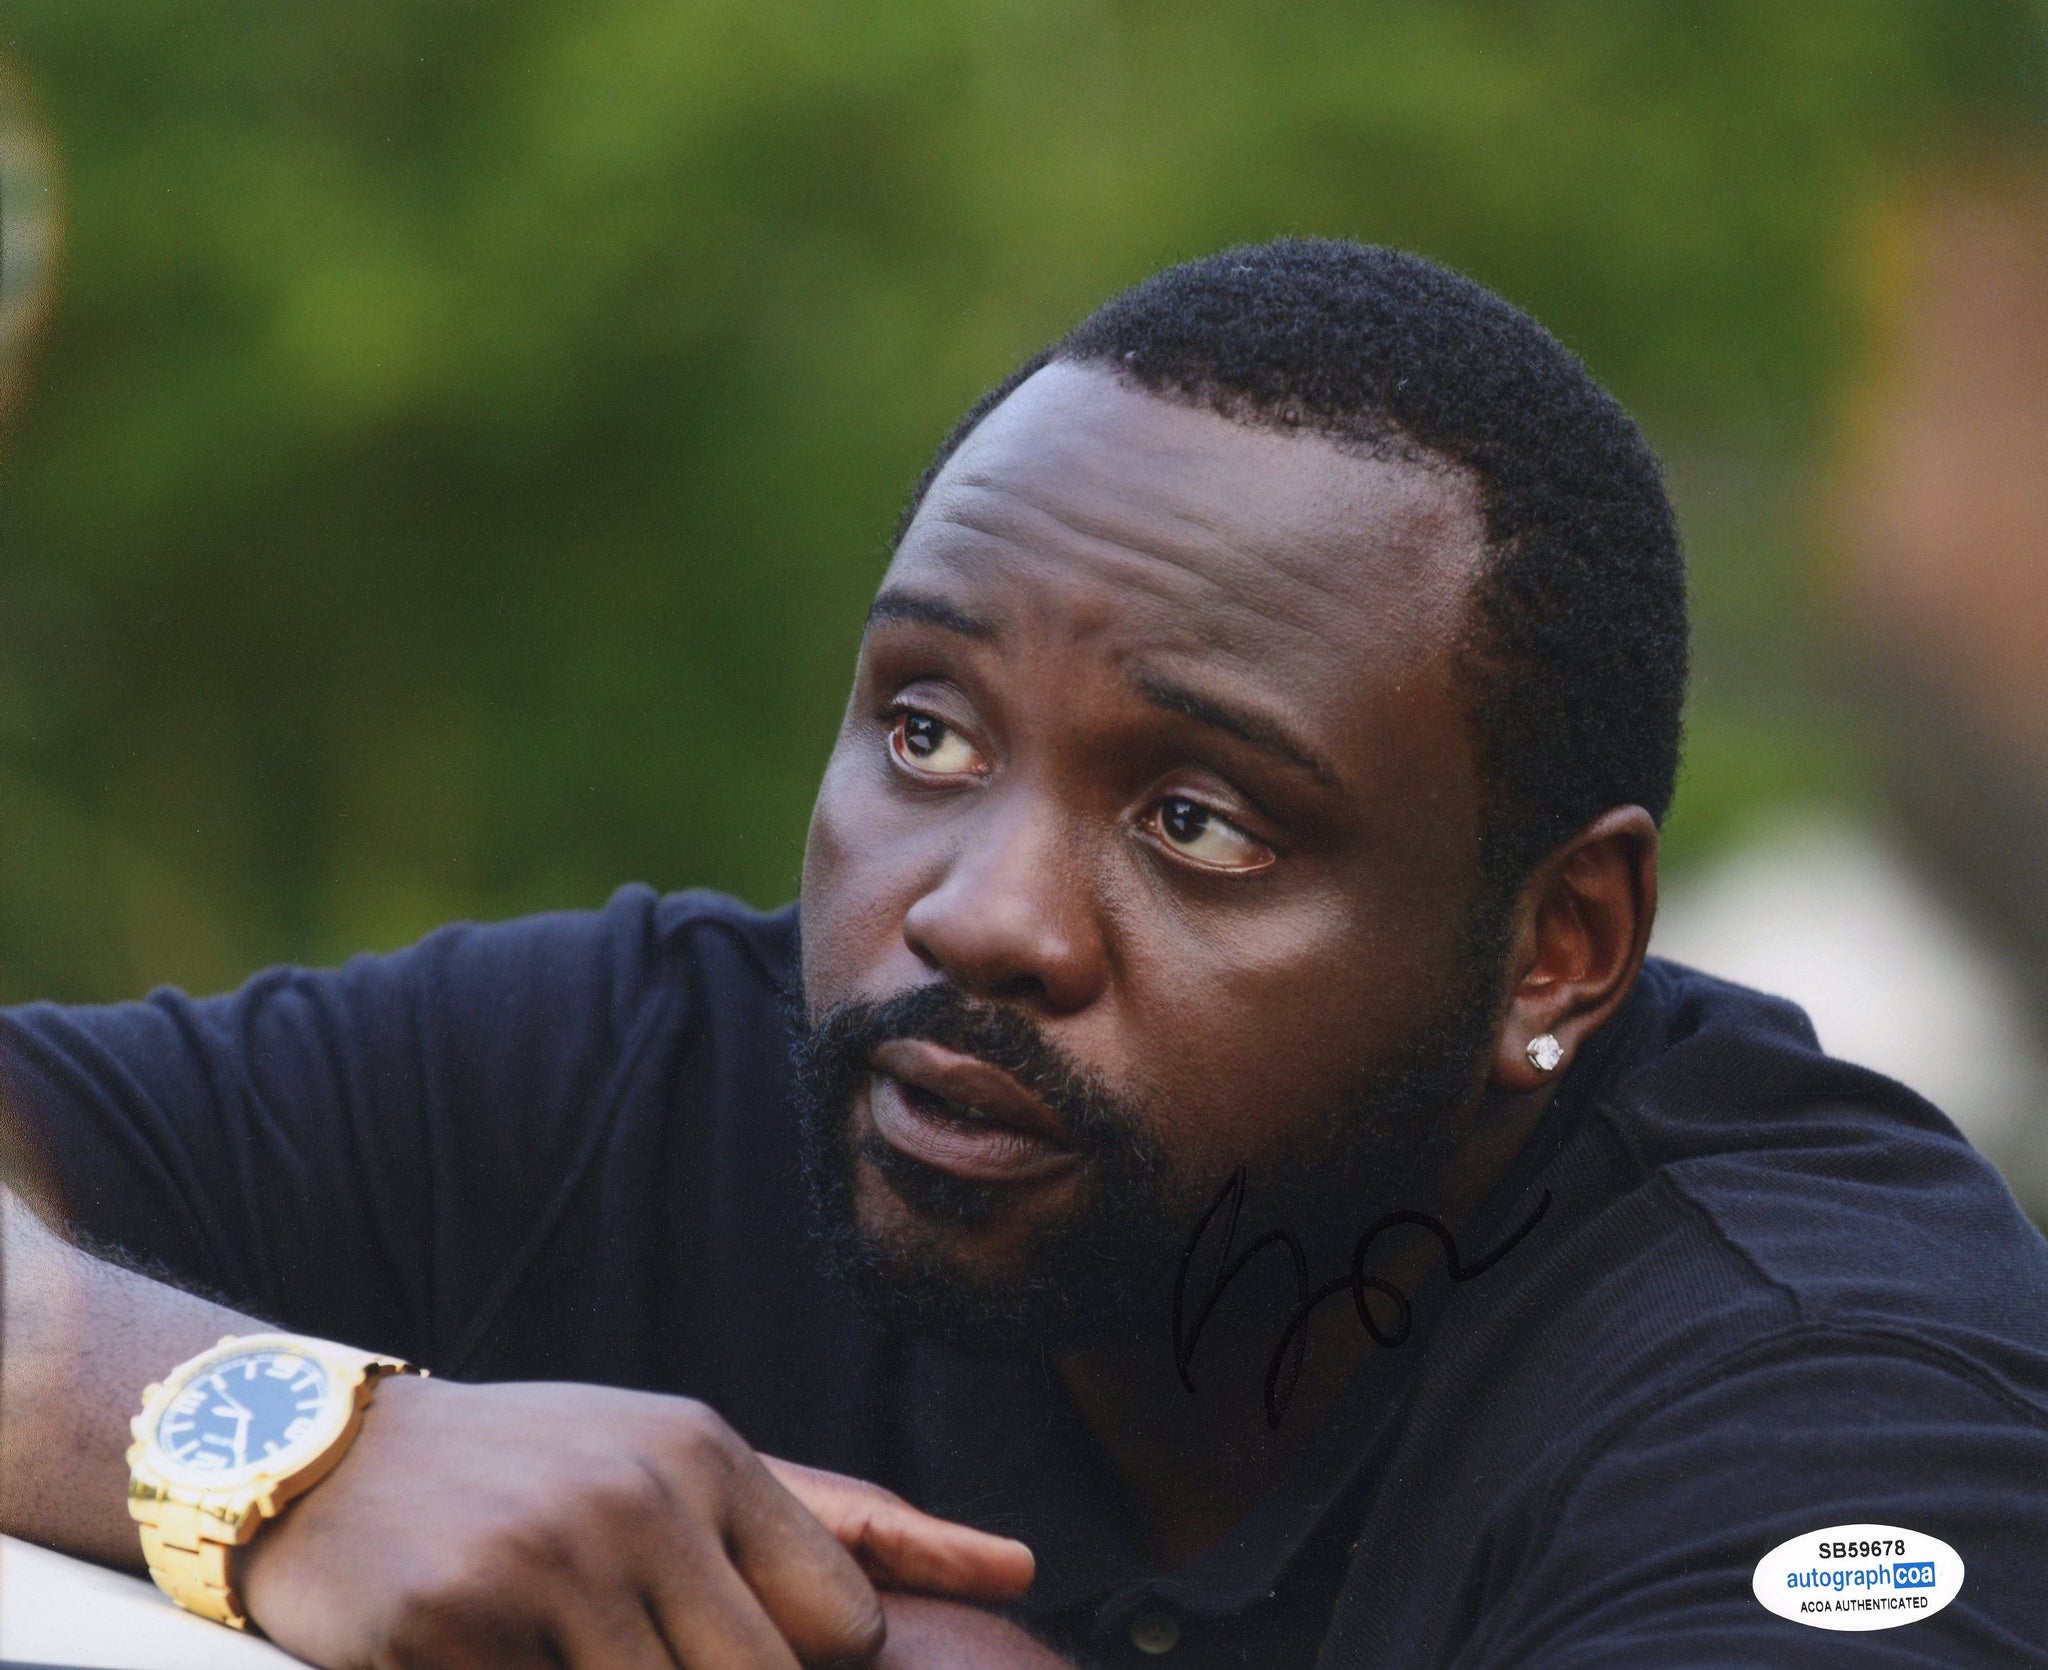 Brian Tyree Henry Eternals Signed Autograph 8x10 Photo ACOA